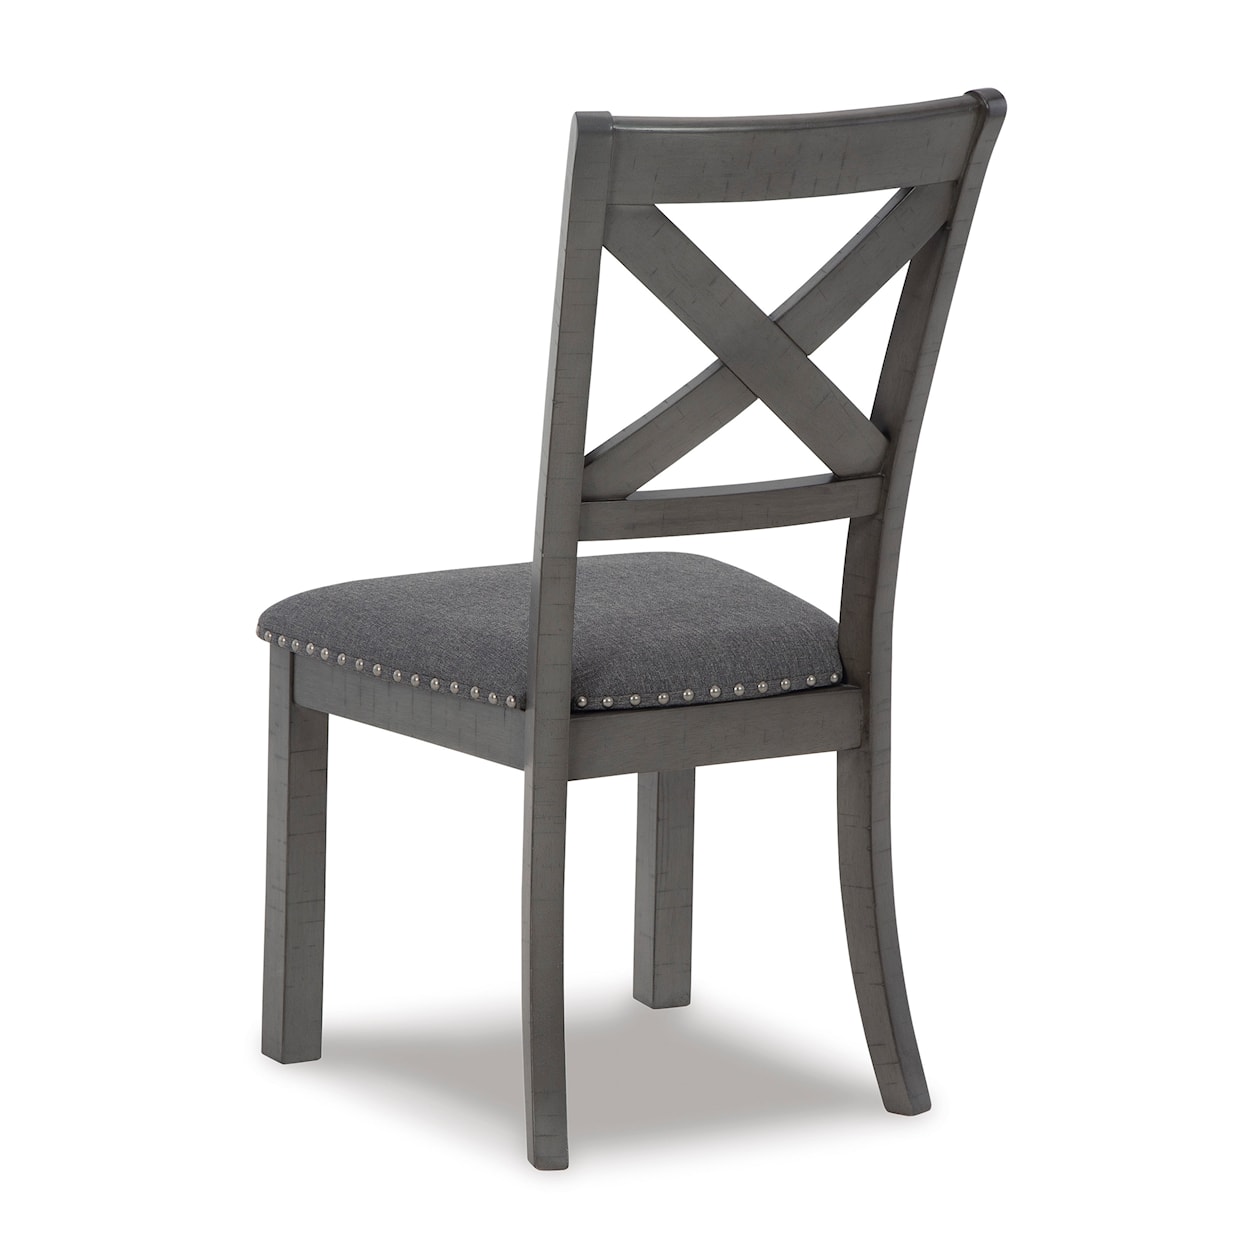 Belfort Select Willow Bend Dining Chair